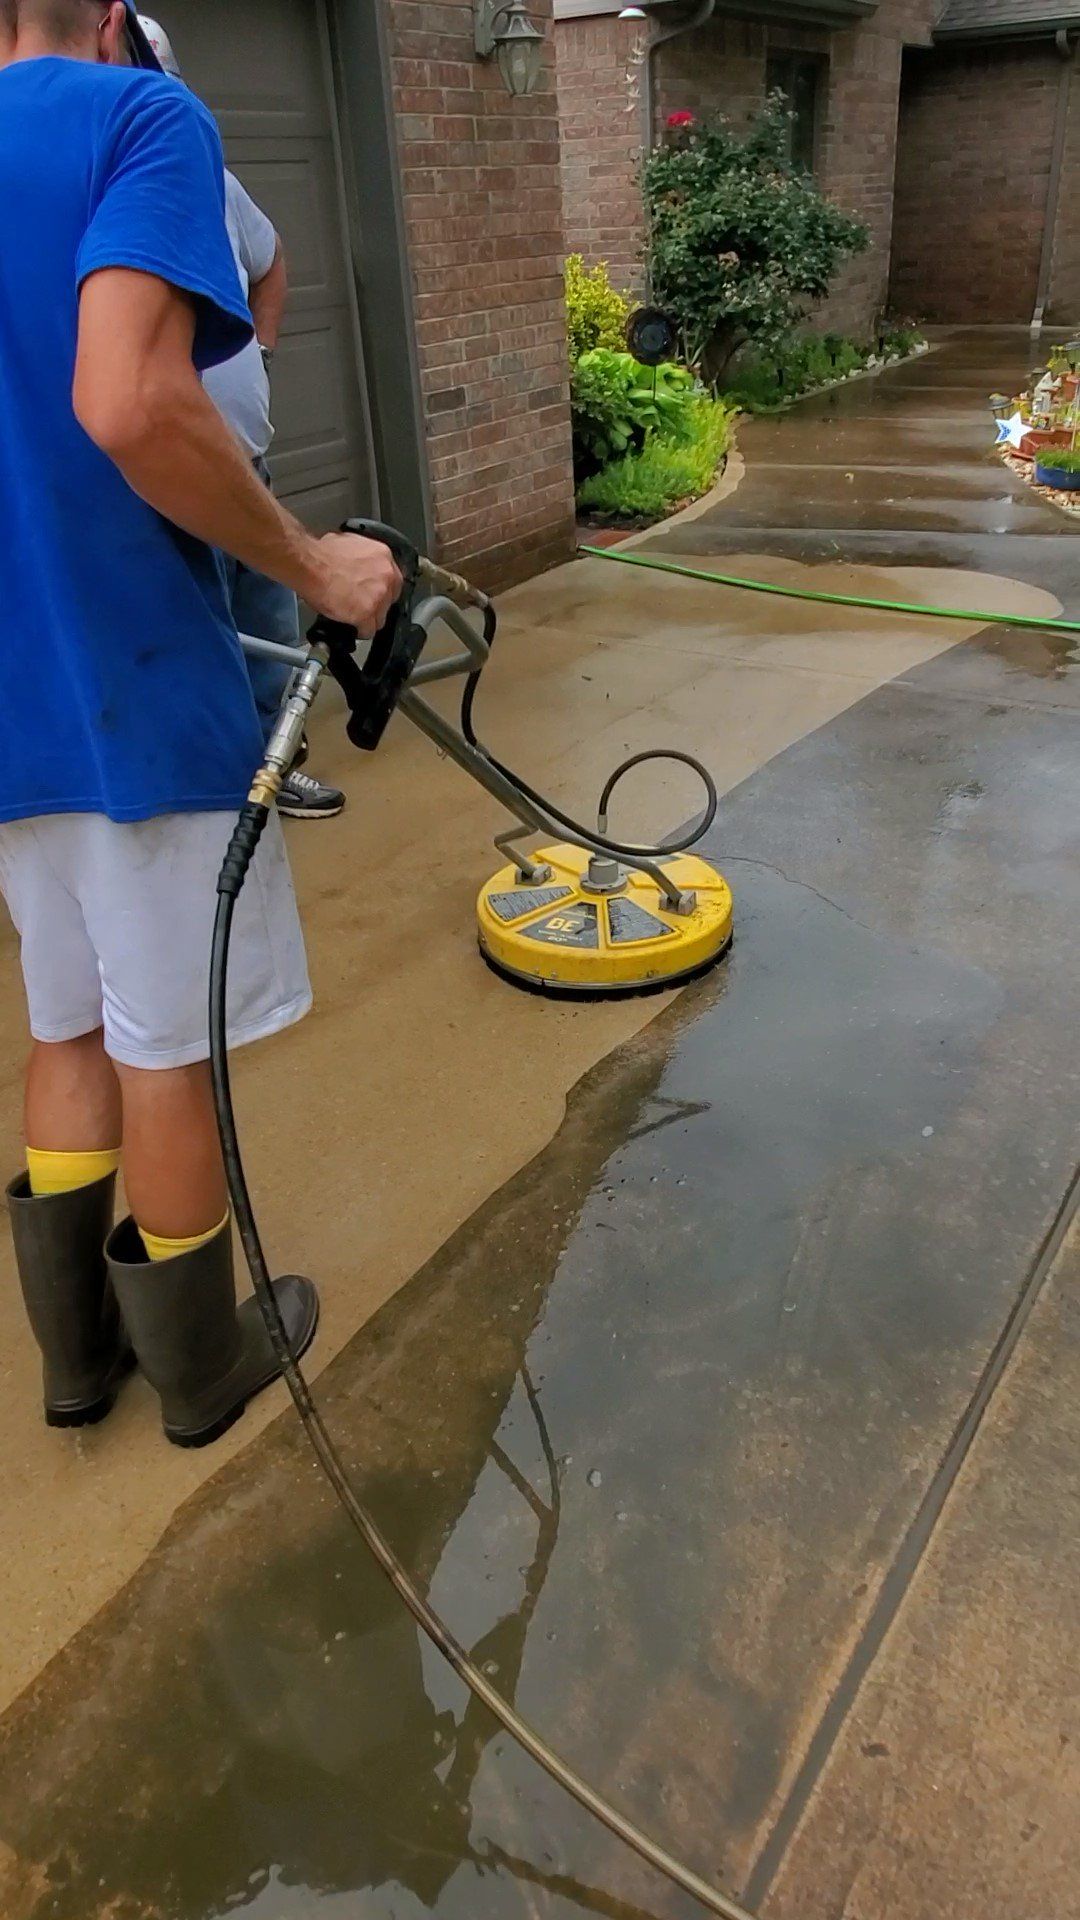 A man is using a pressure washer to clean a driveway.